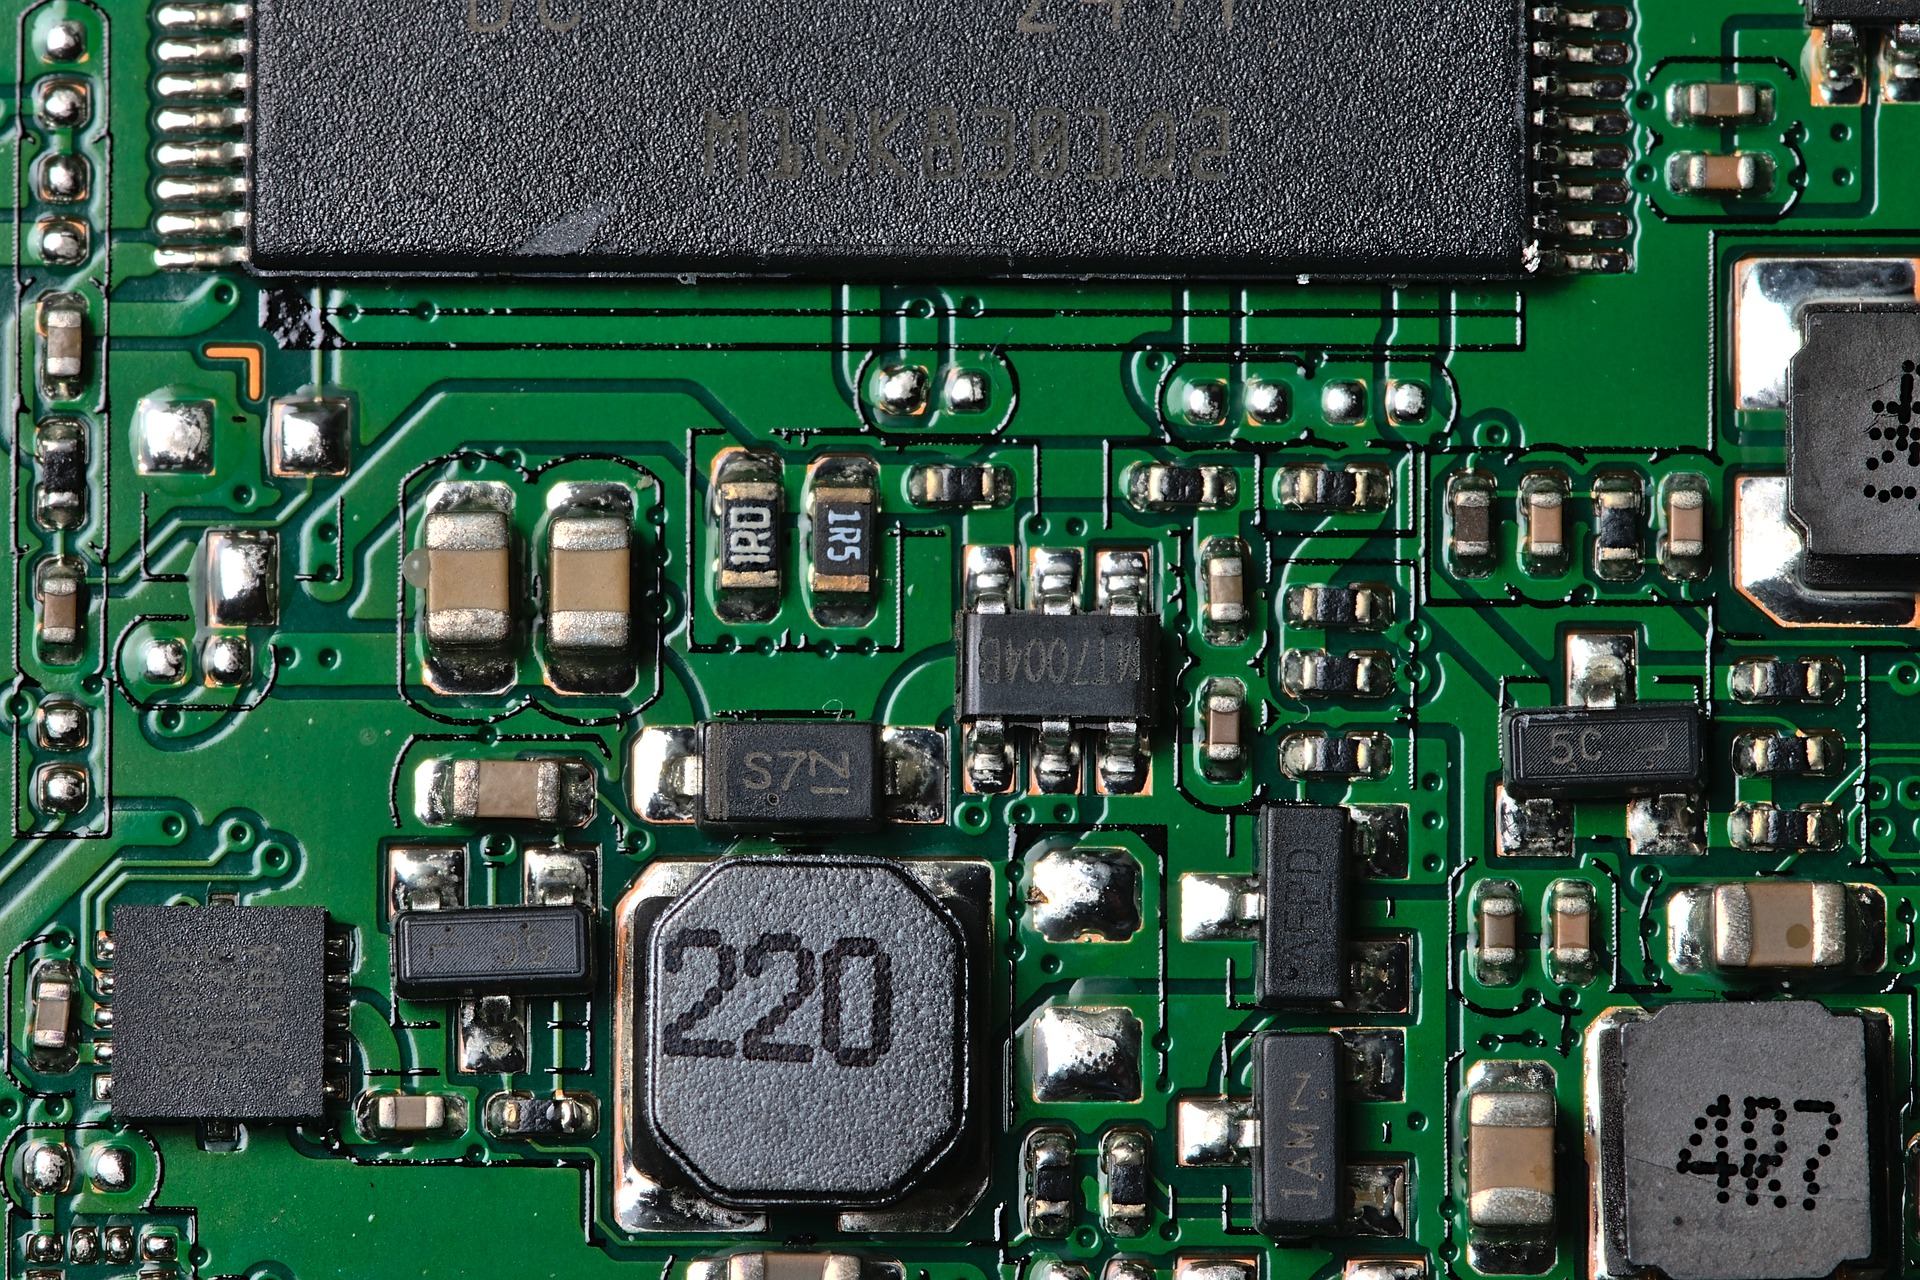 FR-4 is a standard PCB material